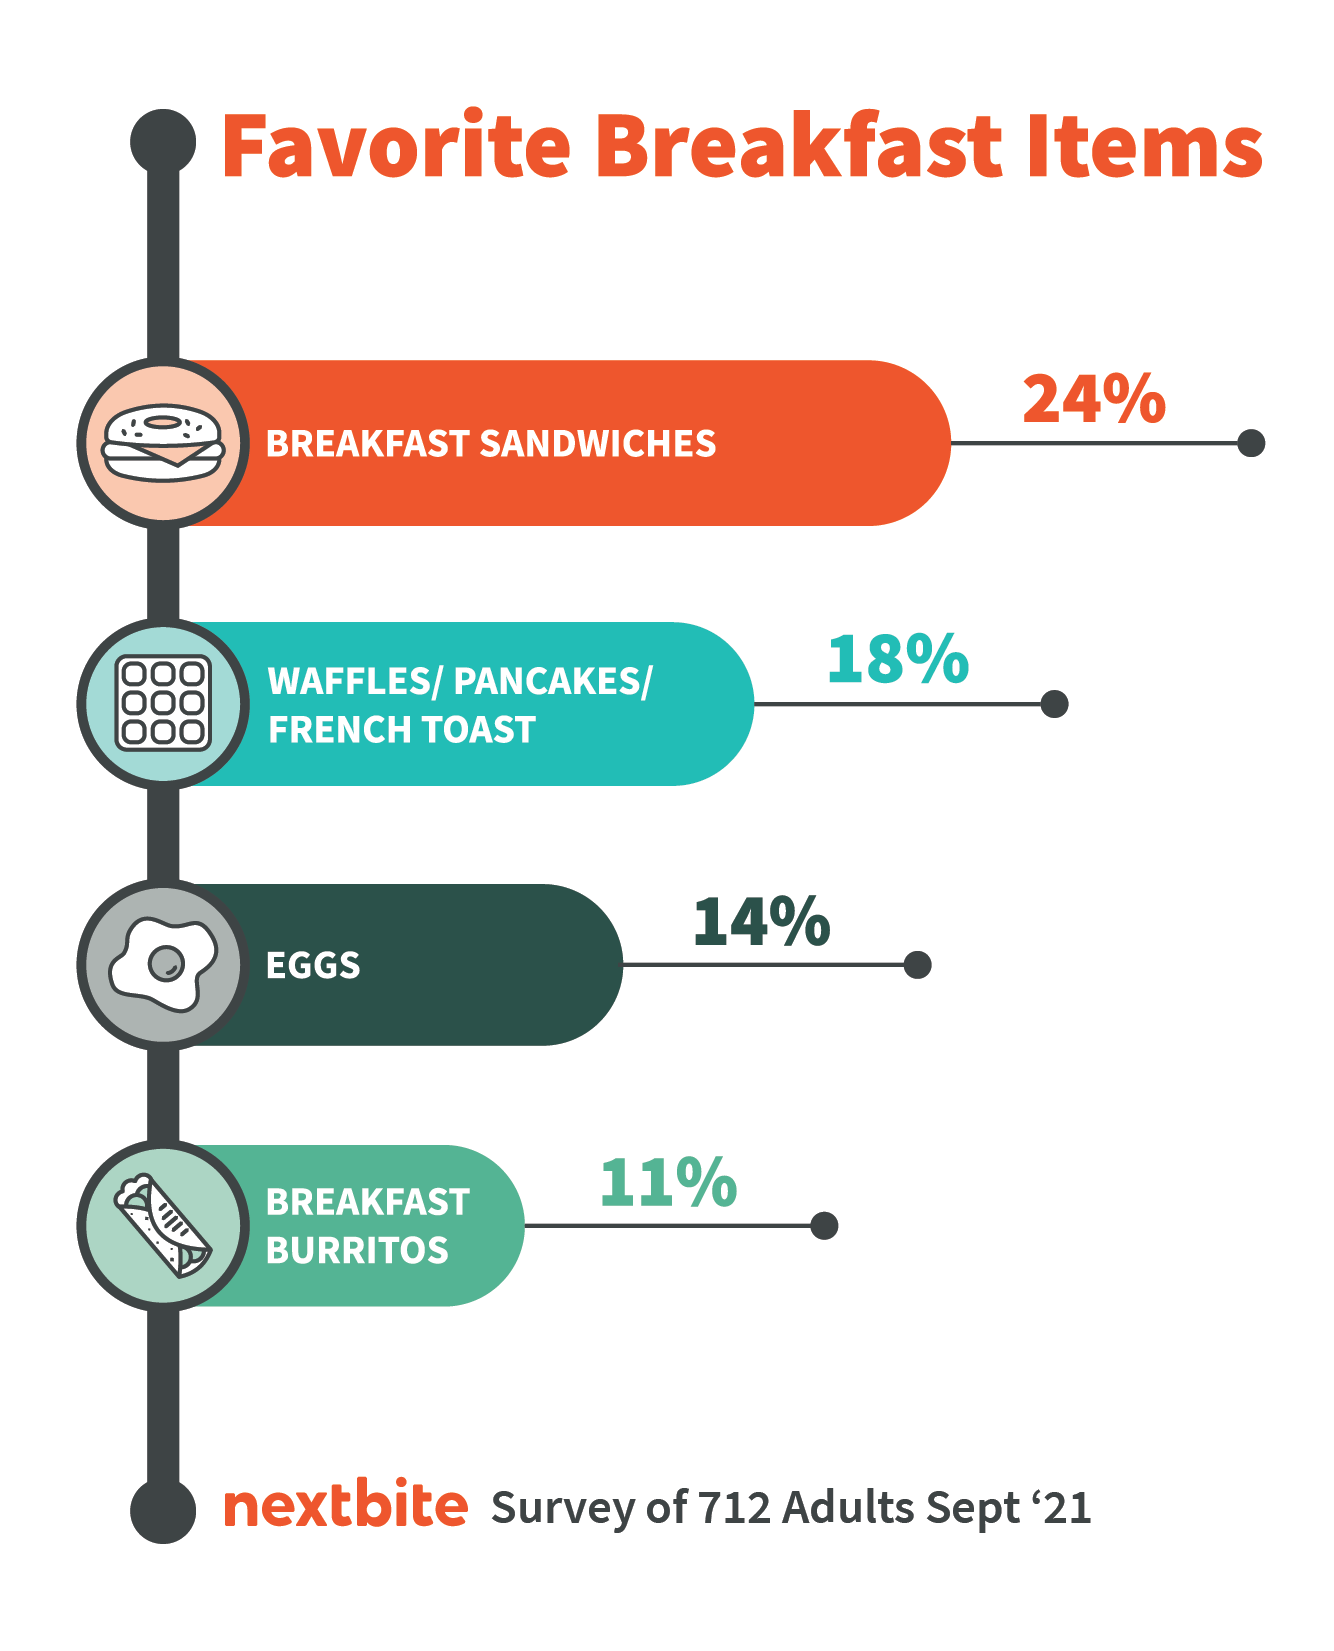 National Breakfast Day Survey Reports that Breakfast Sandwiches Top Pick